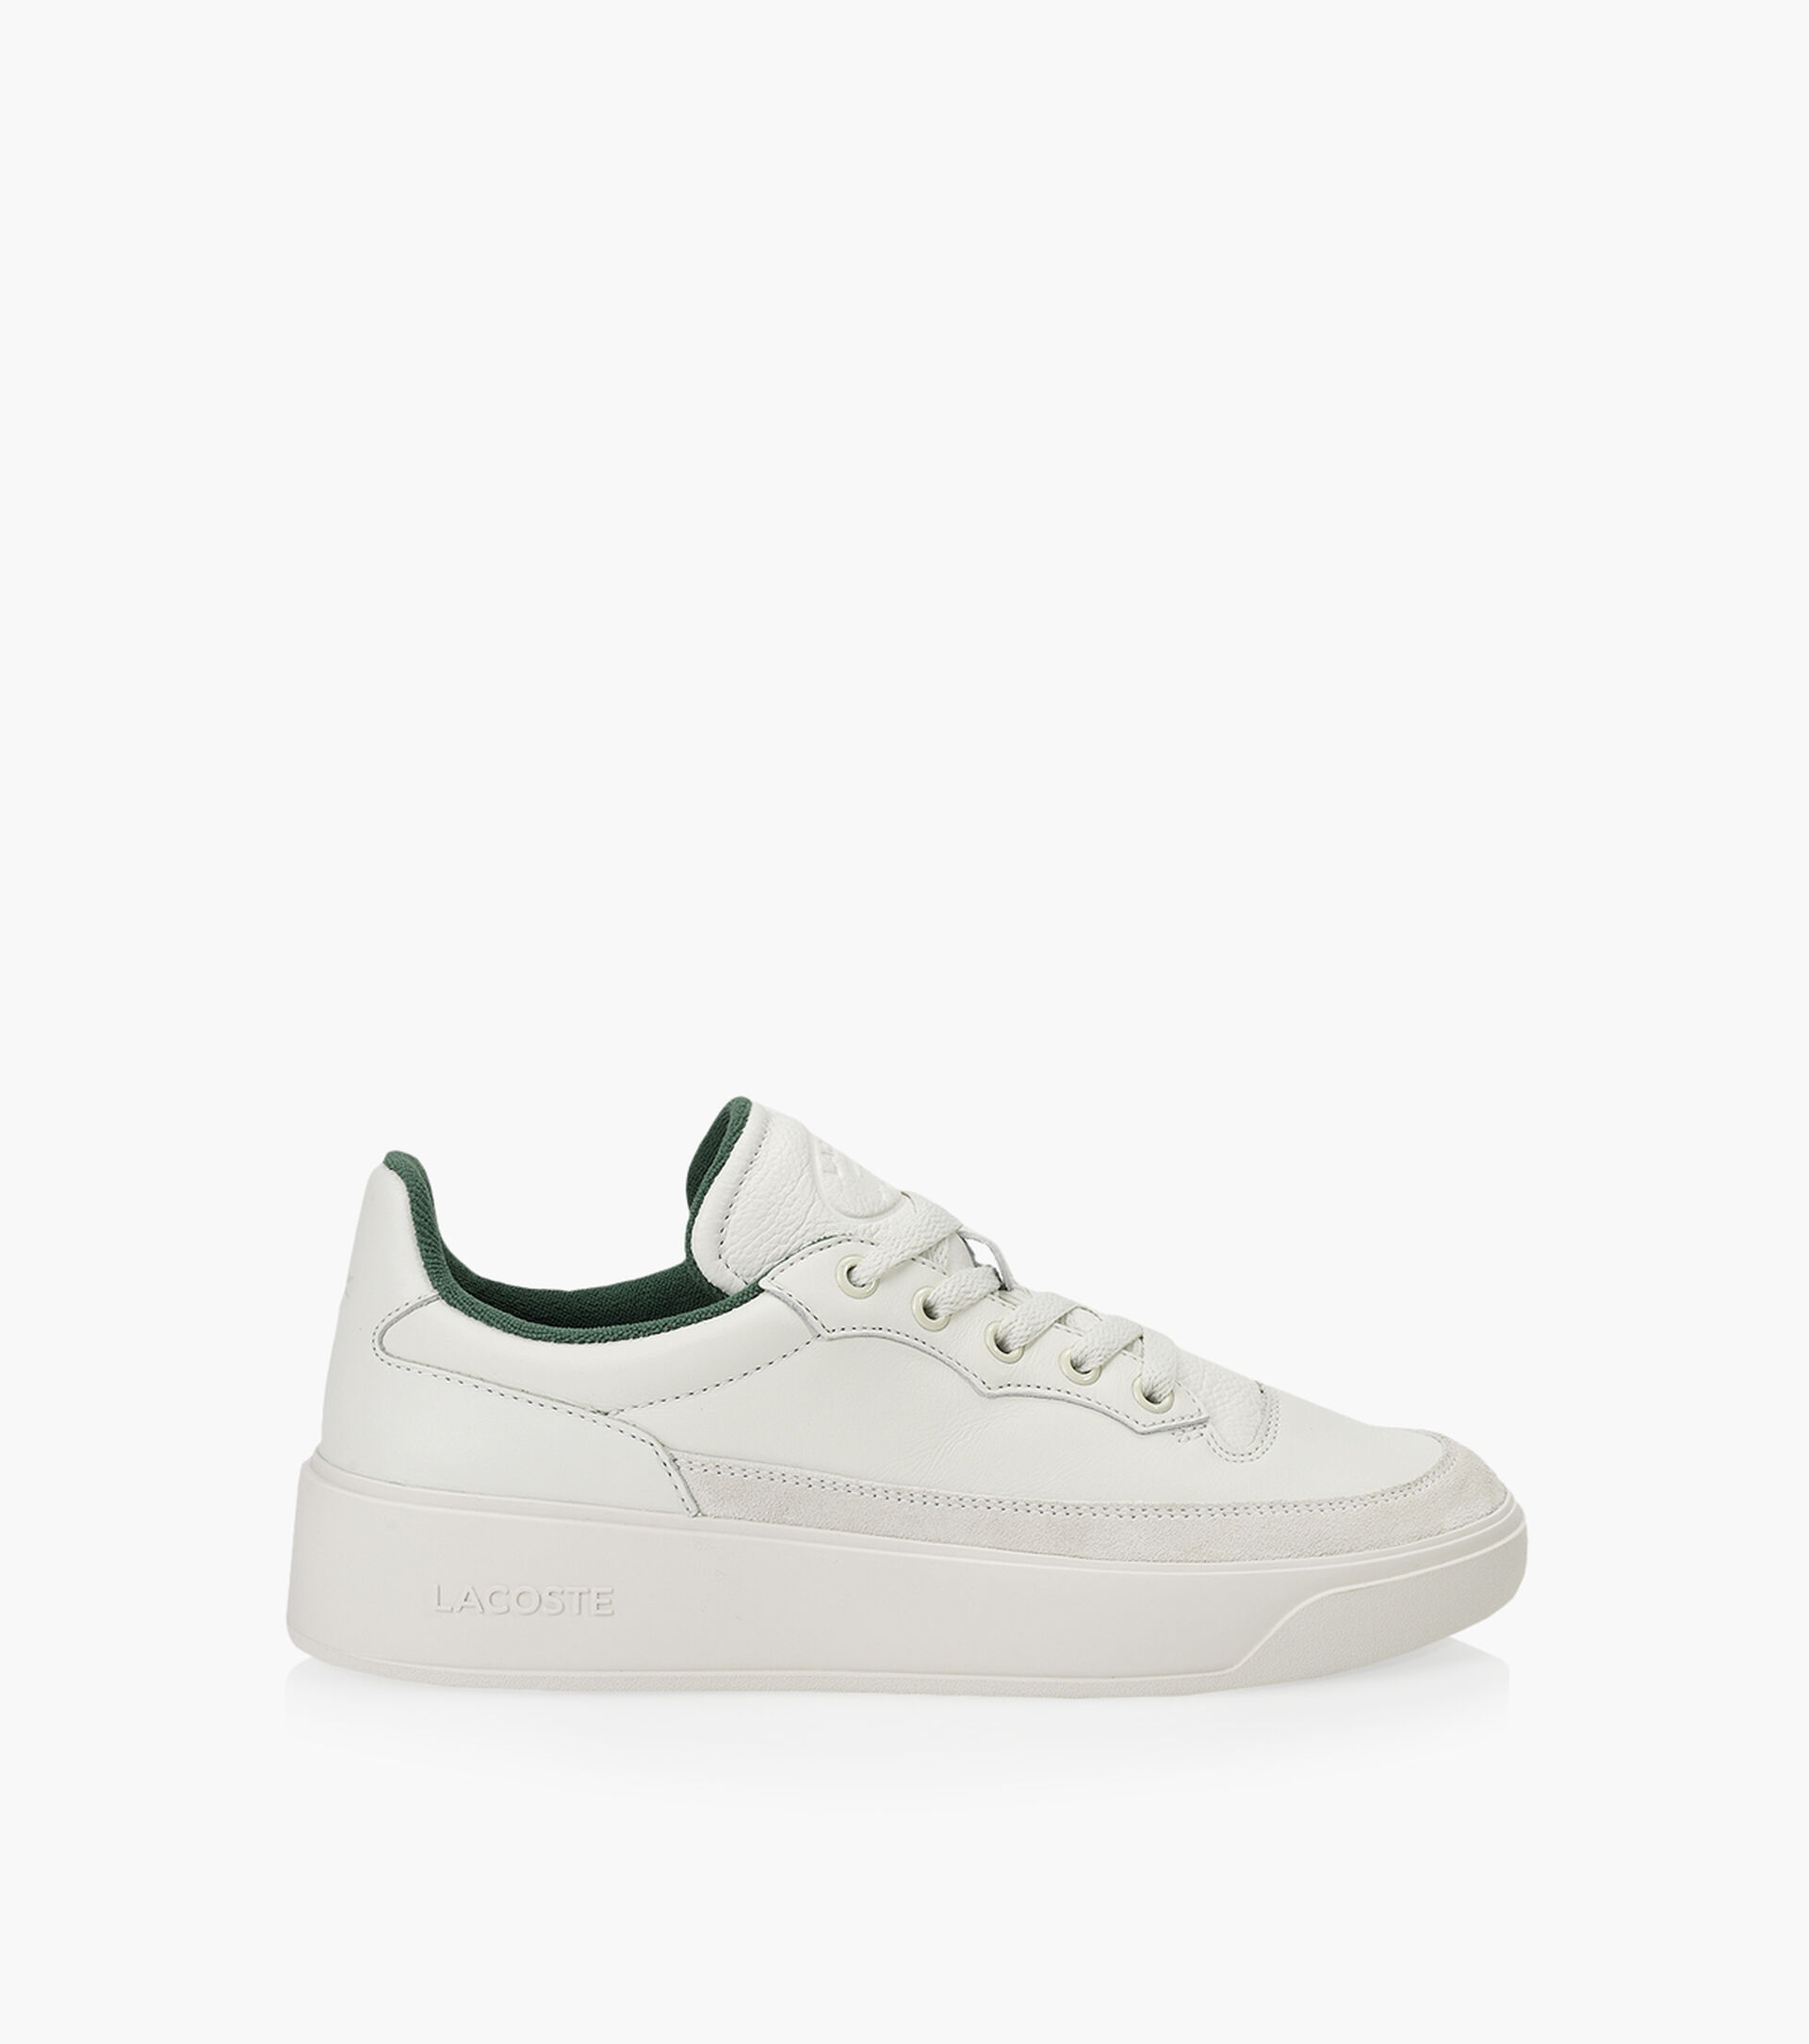 LACOSTE G80 CLUB - White Leather | Browns Shoes